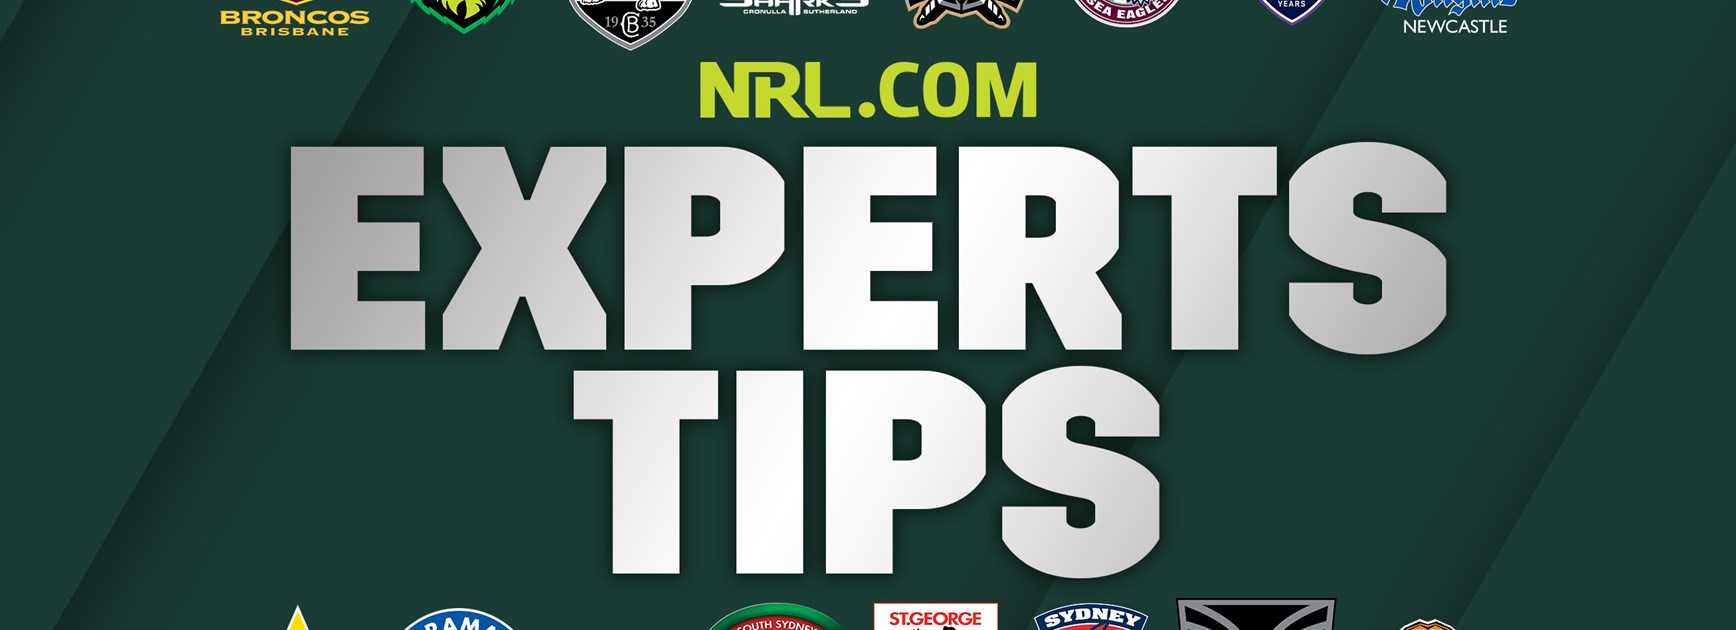 NRL Tipping: Grand final - see what the experts are saying